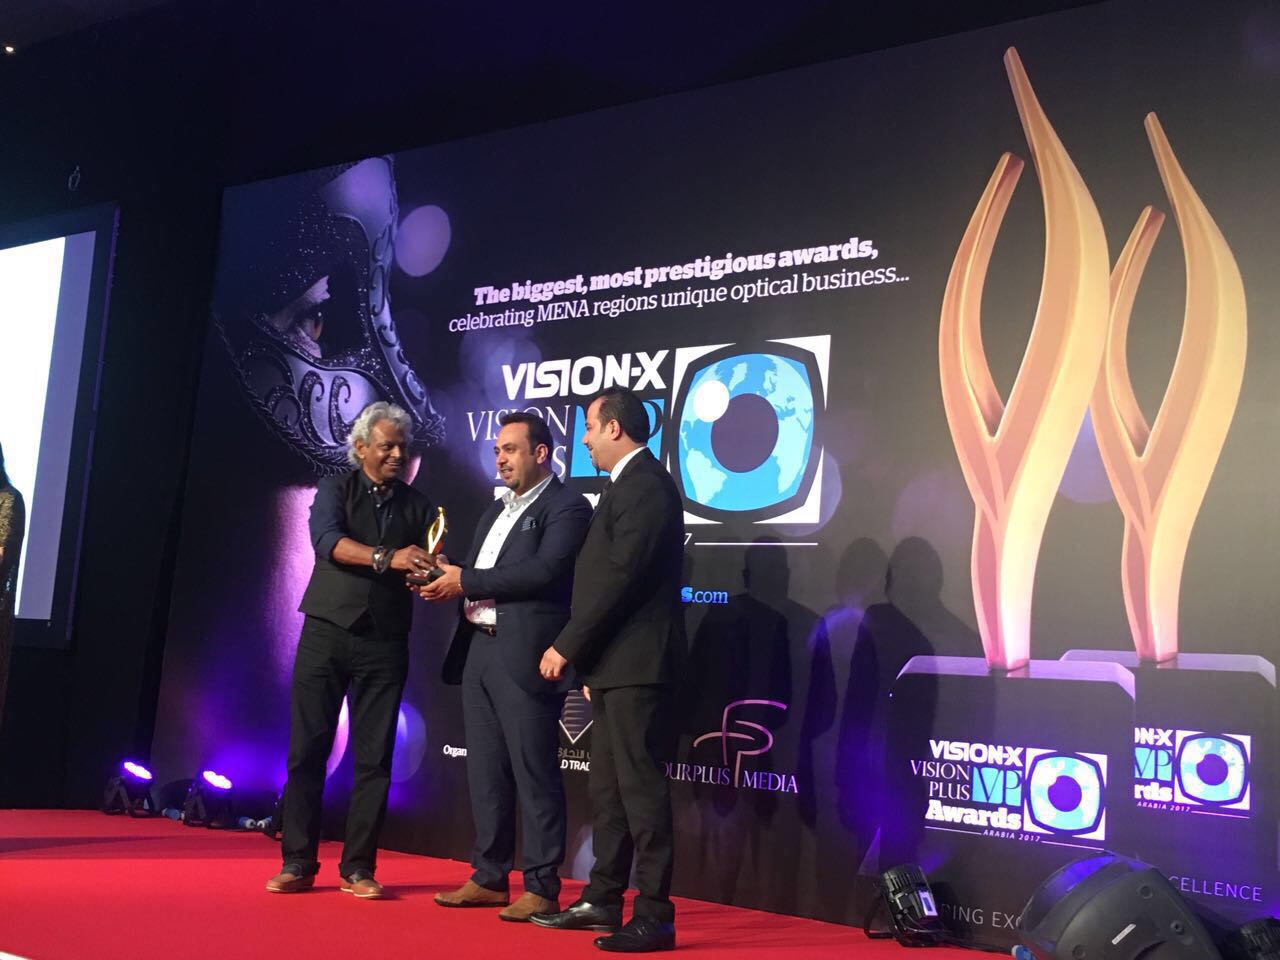 The 4th edition of Vision-X VP Awards